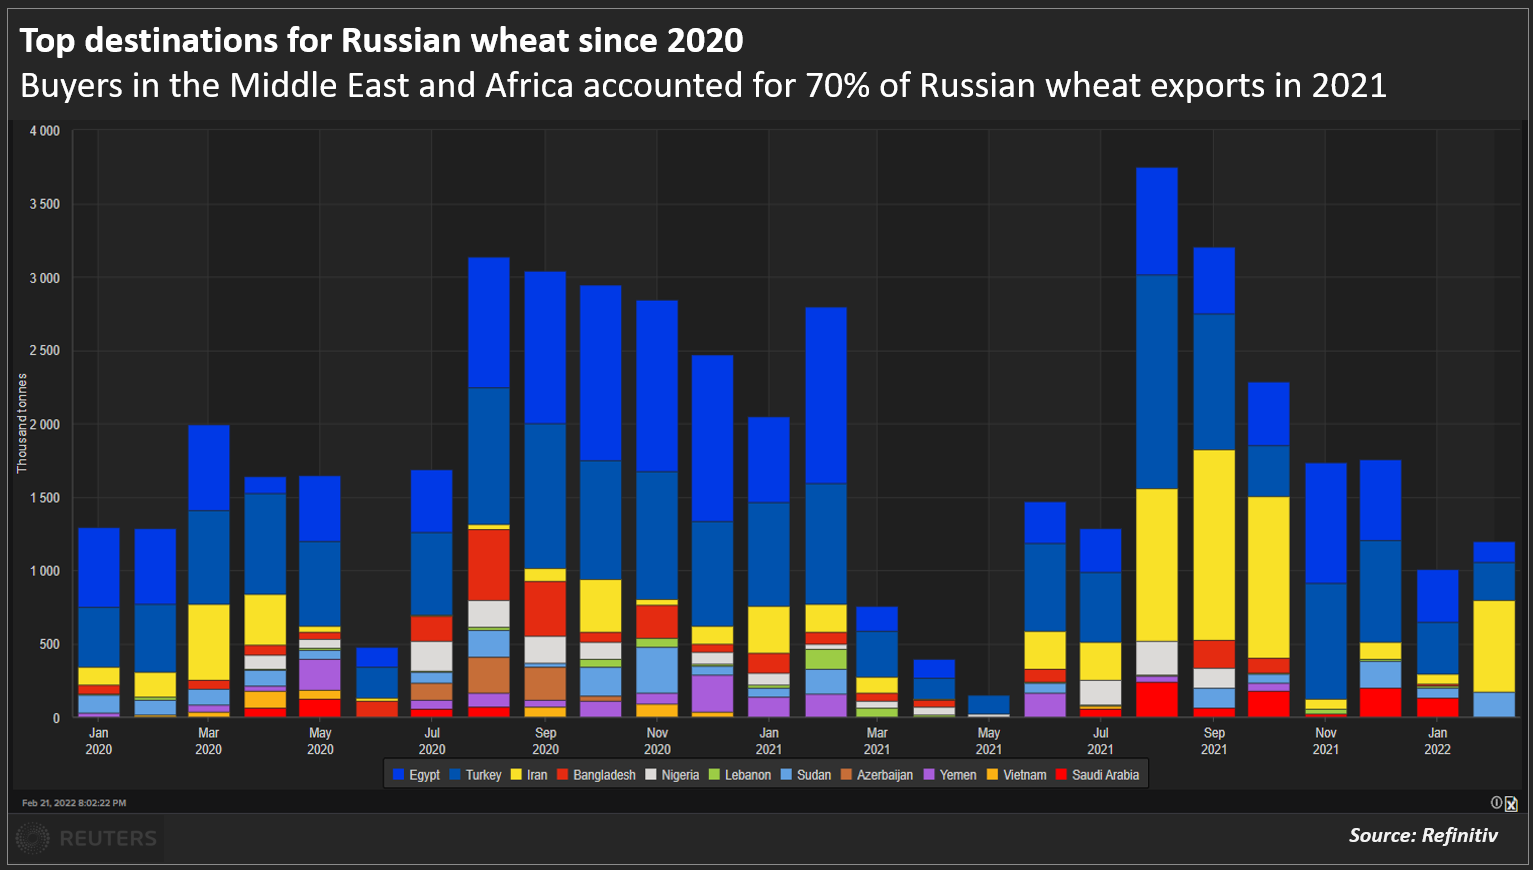 Top destinations for Russian wheat since 2020